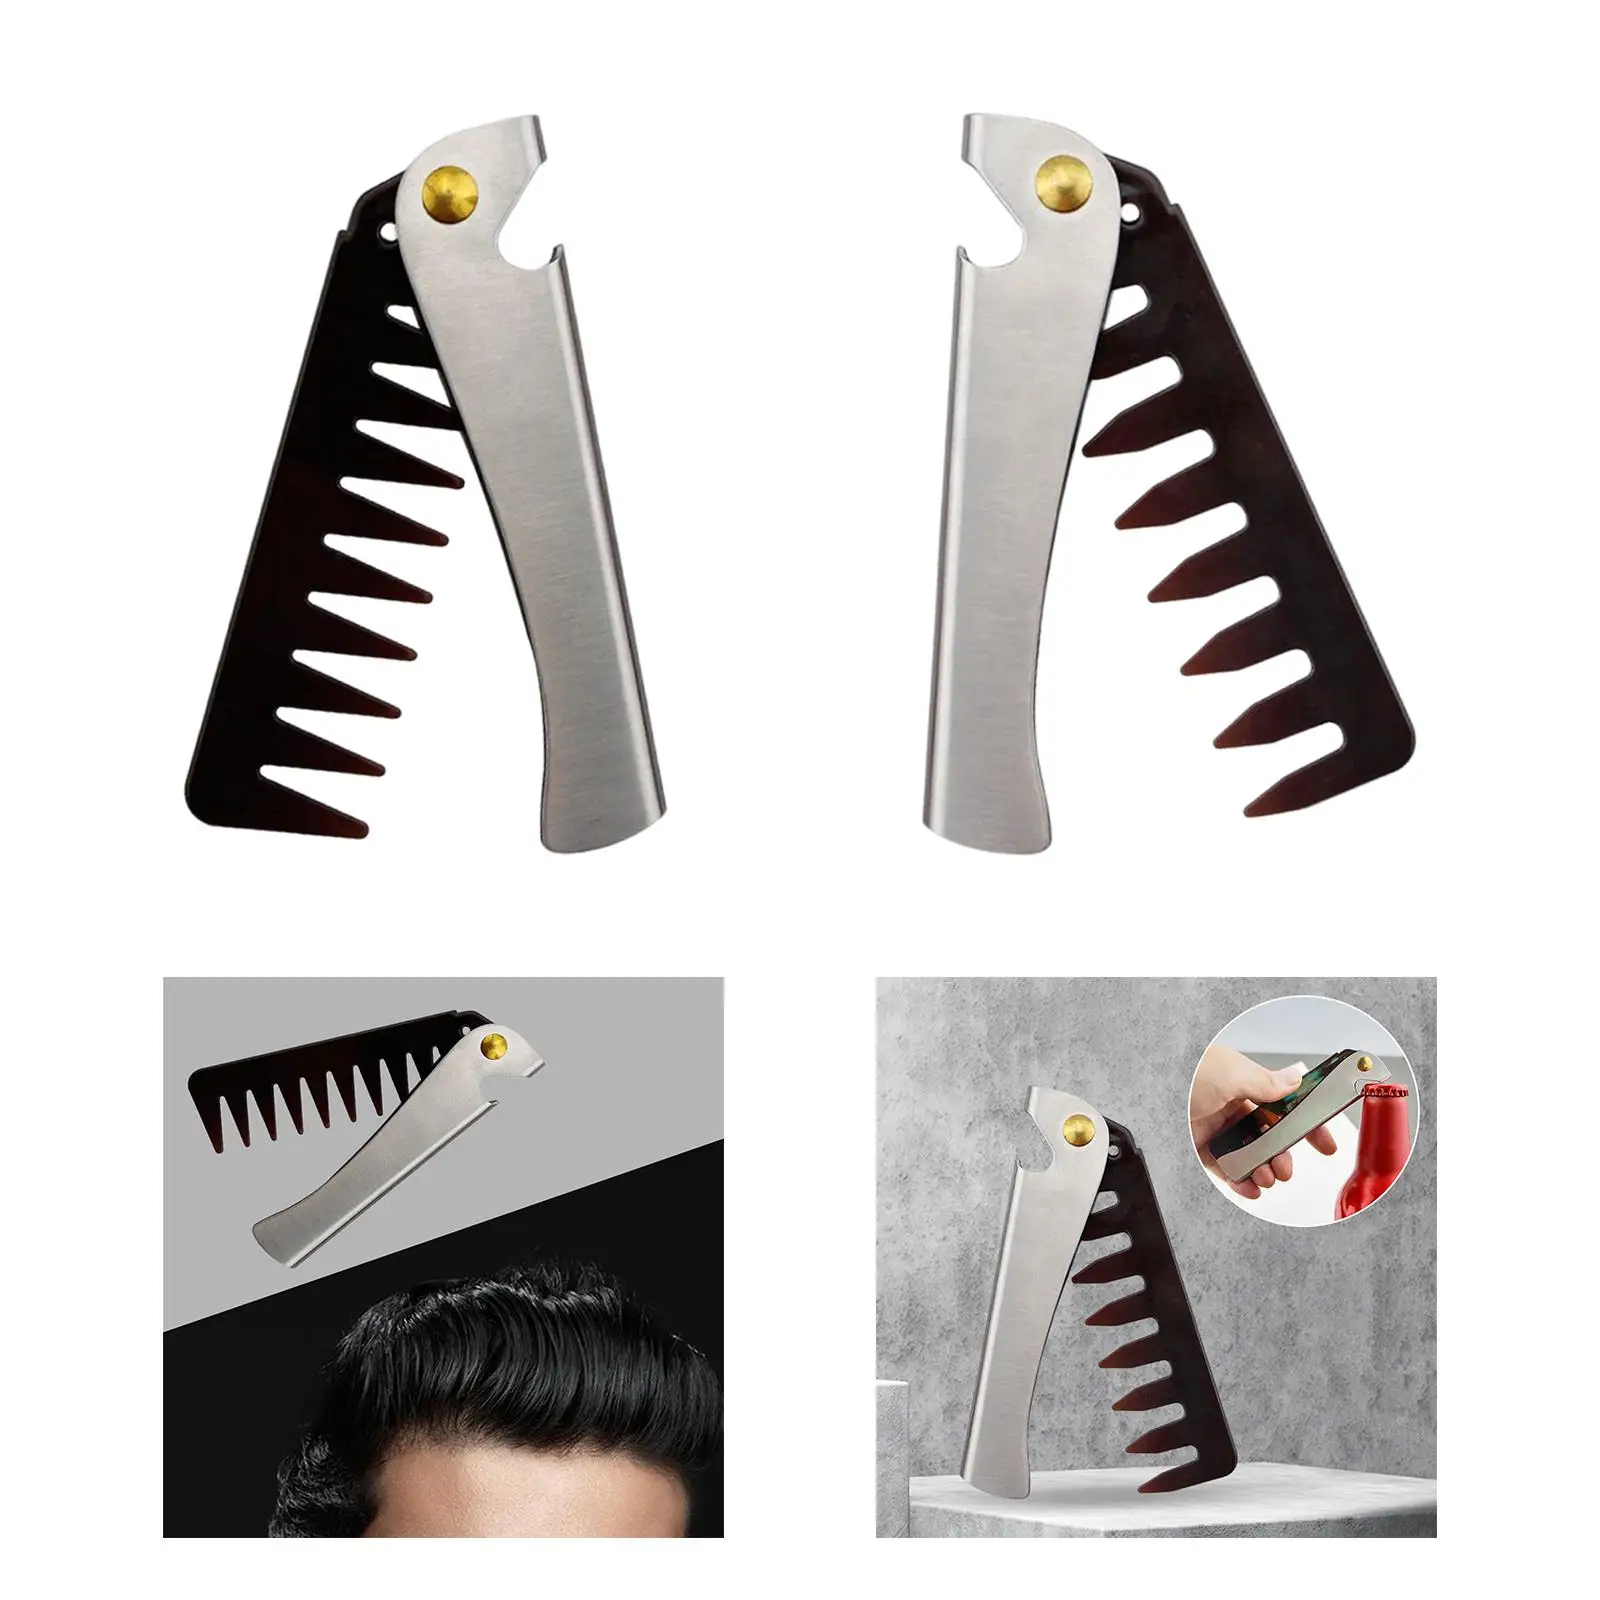 Portable Folding Beard Comb for Men Stainless Steel Grooming Combing Hair Gift Retro Oil Head Comb for Stylists Home Use Travel